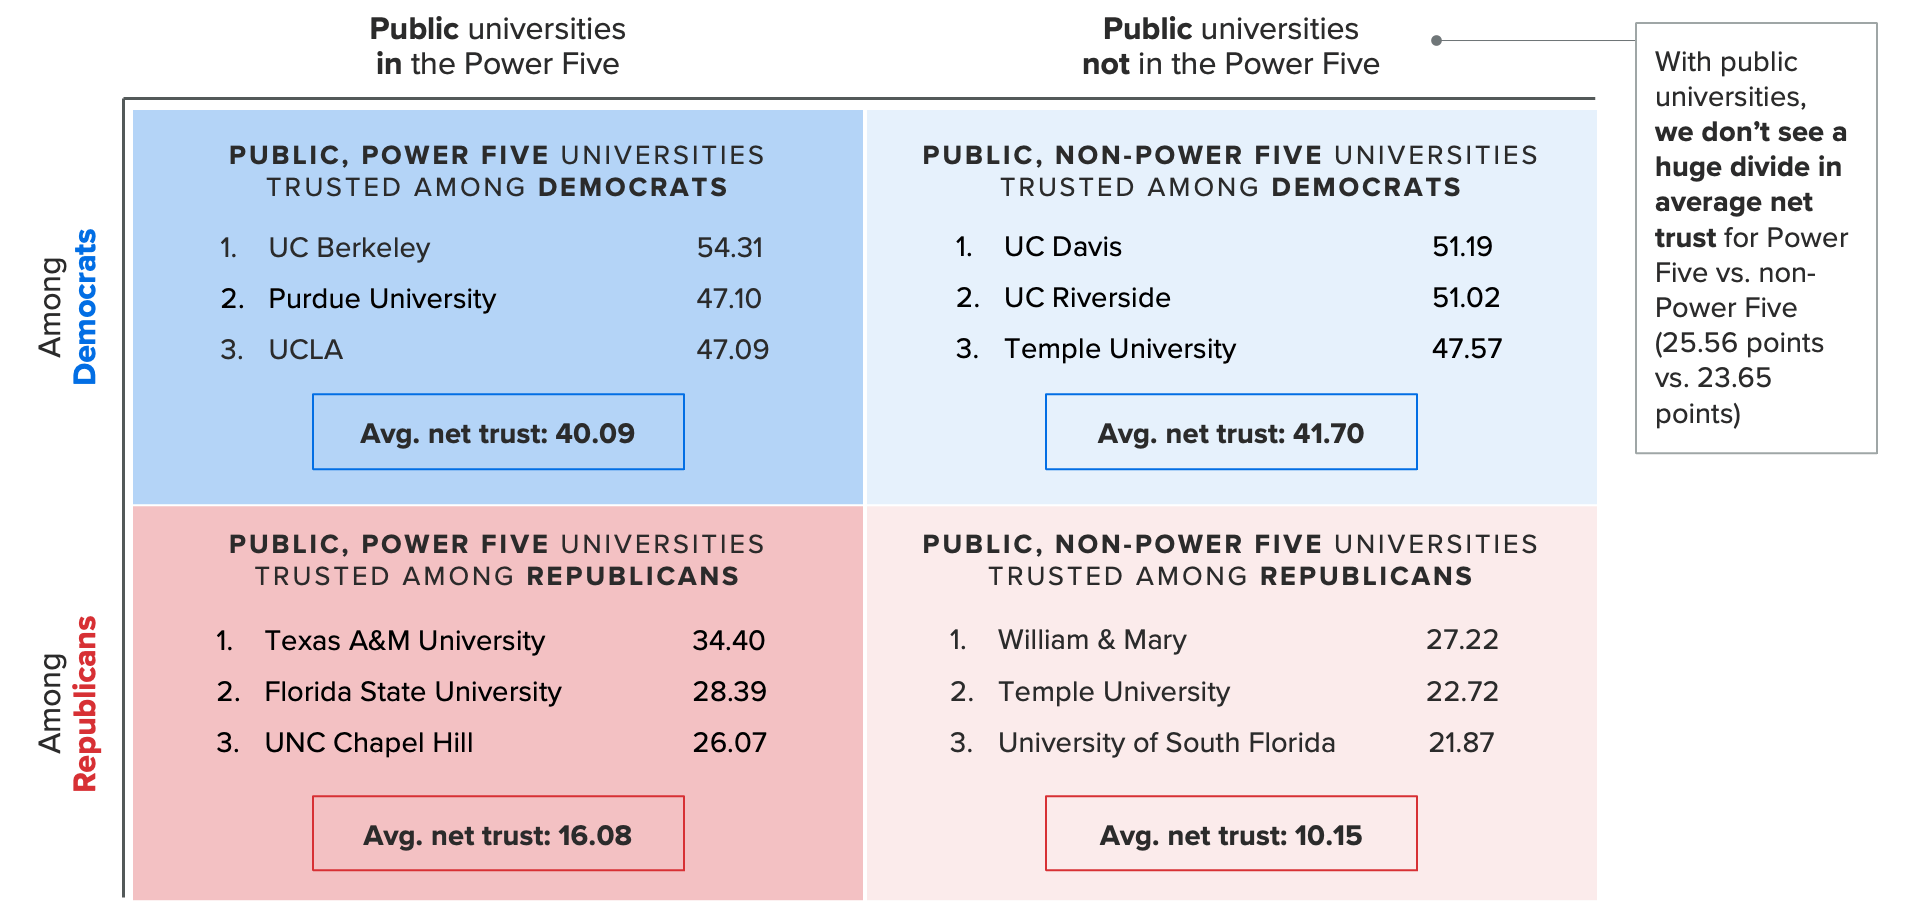 Table showing the most trusted public universities by party, showing Republicans trust Power Five public schools more than non-Power Five.